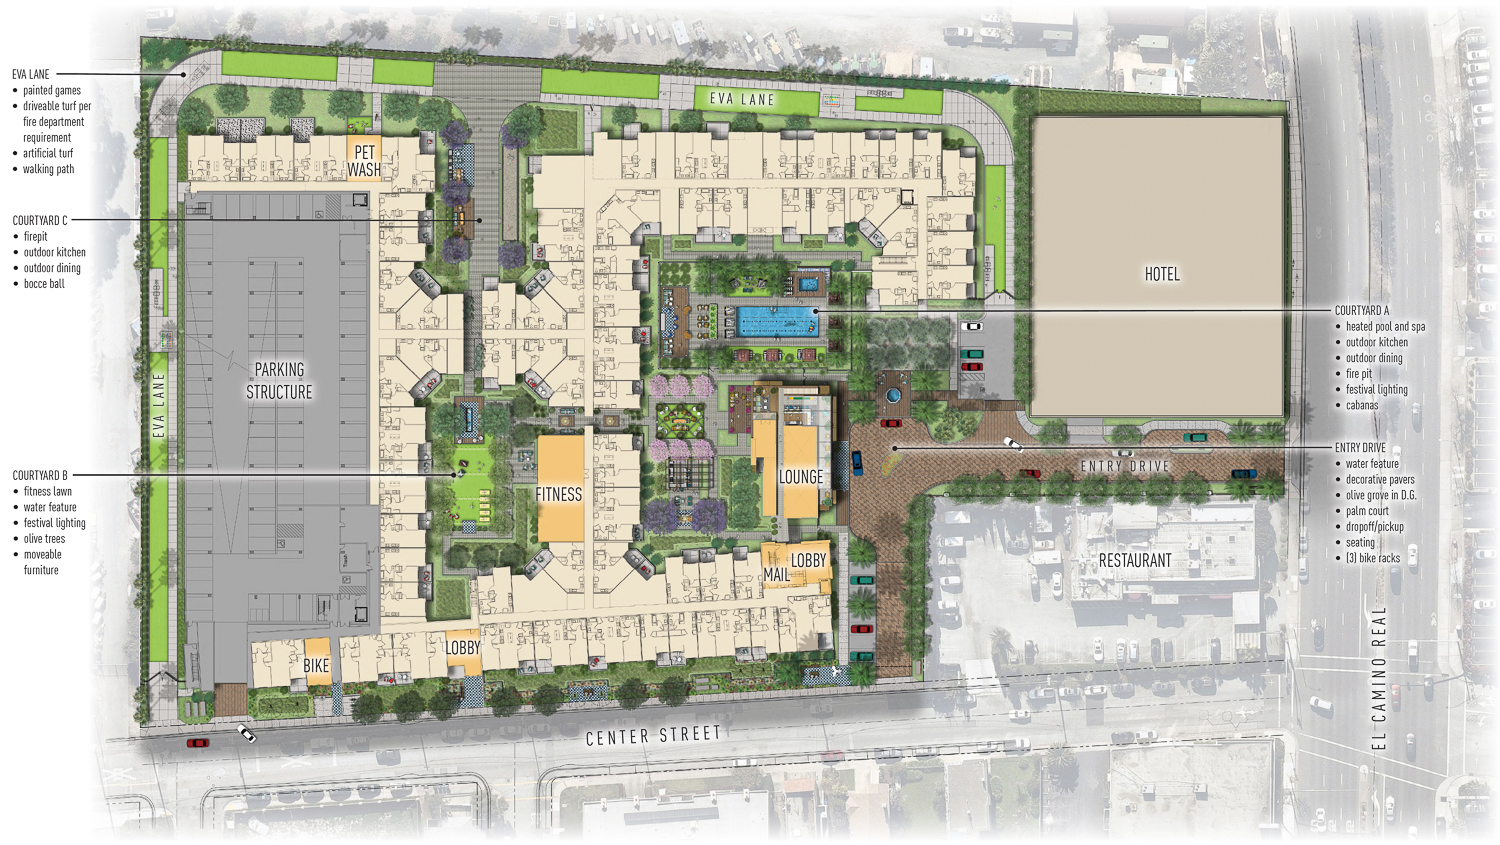 1100 El Camino Real floor plans, site map by KTGY Group